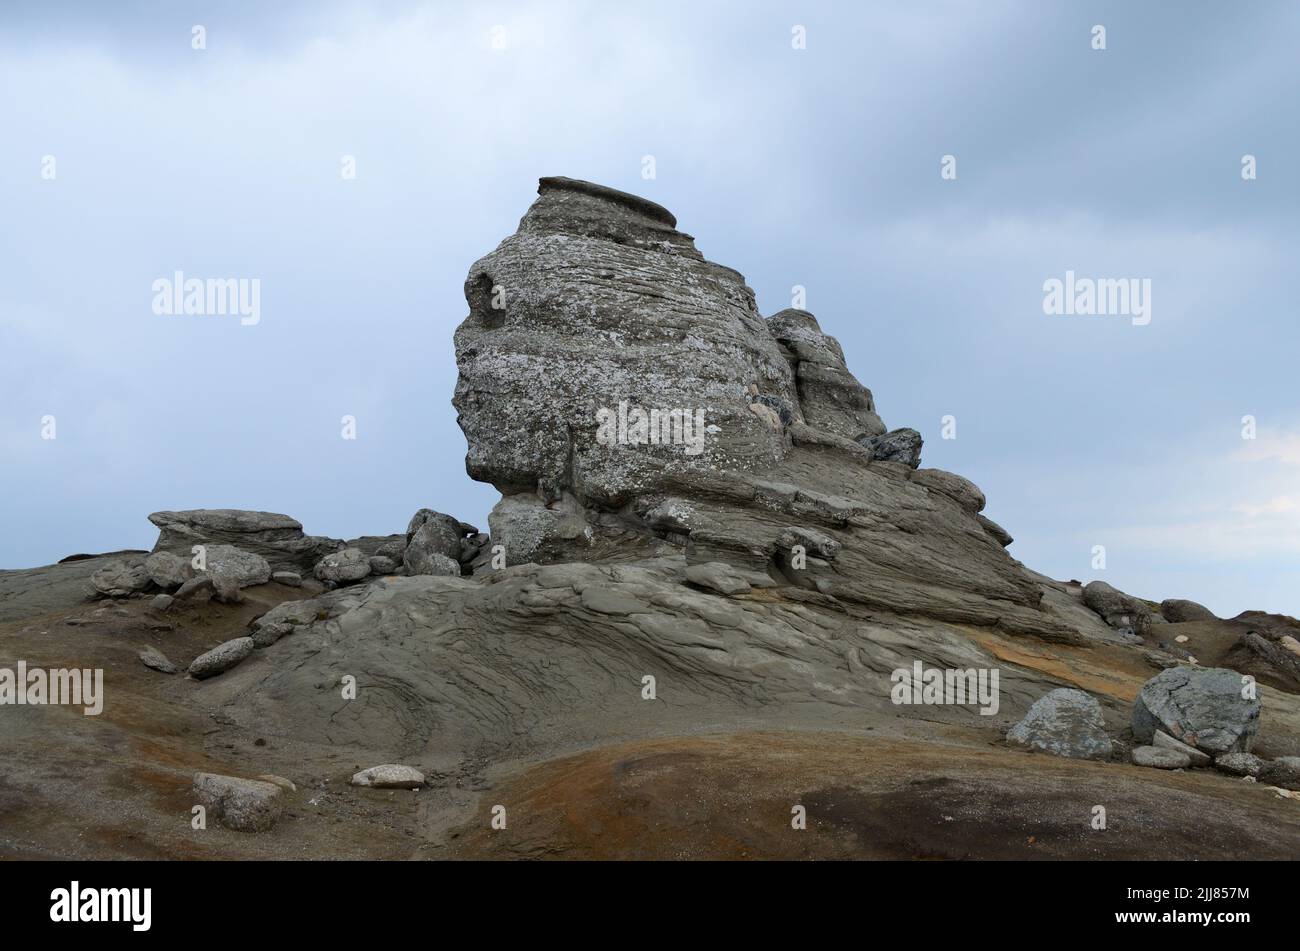 A tall and big rock on the mountain Stock Photo